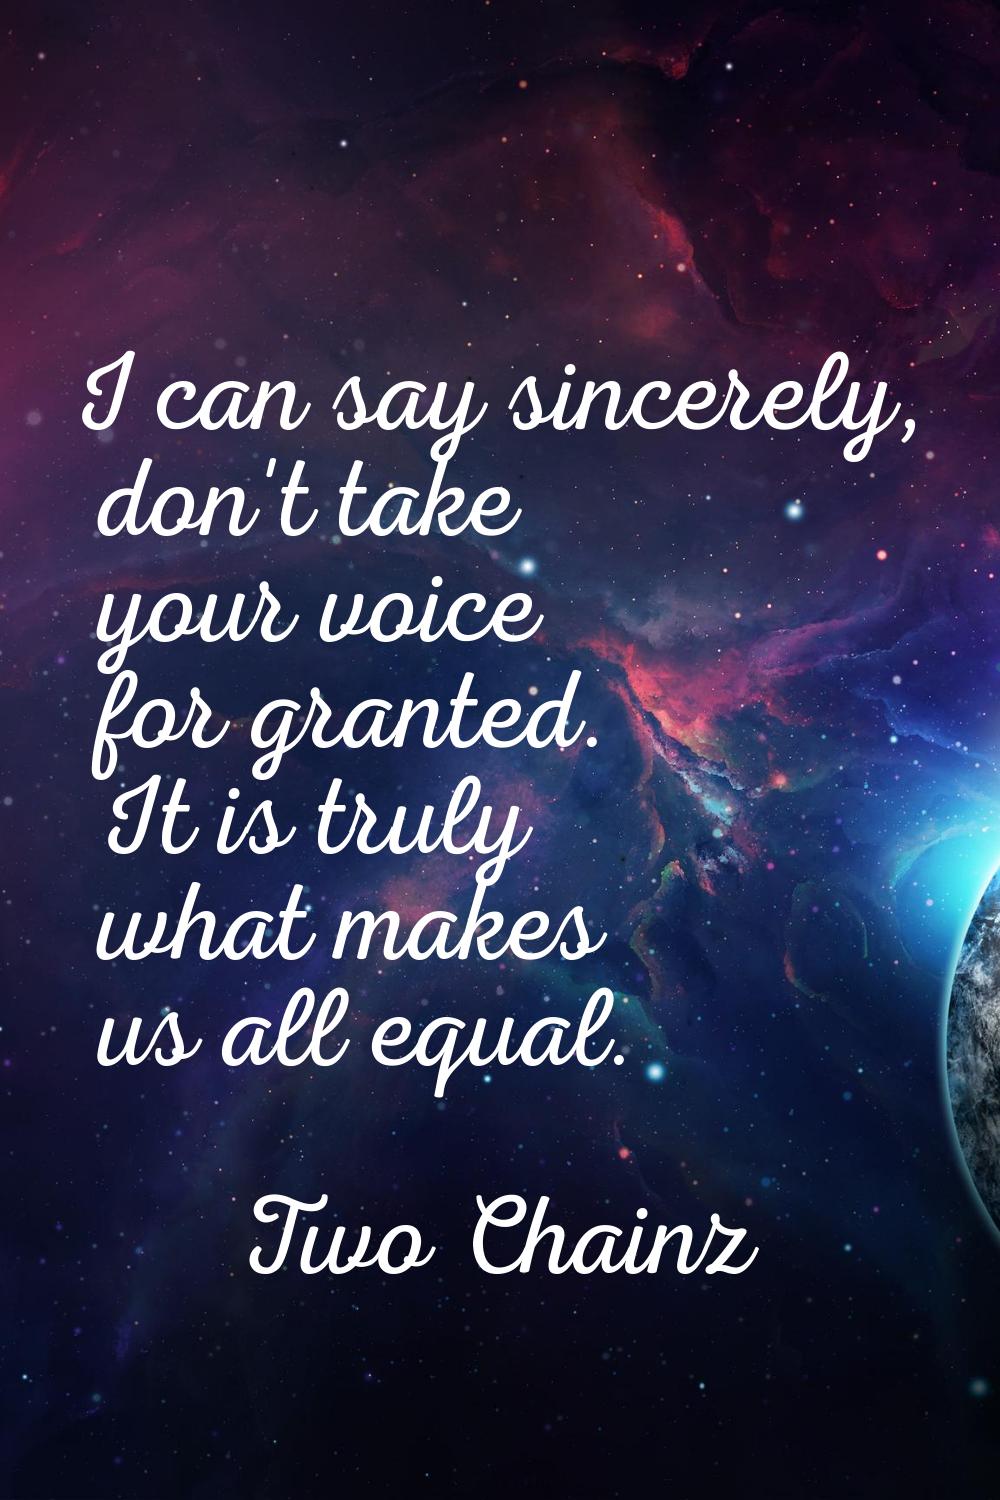 I can say sincerely, don't take your voice for granted. It is truly what makes us all equal.